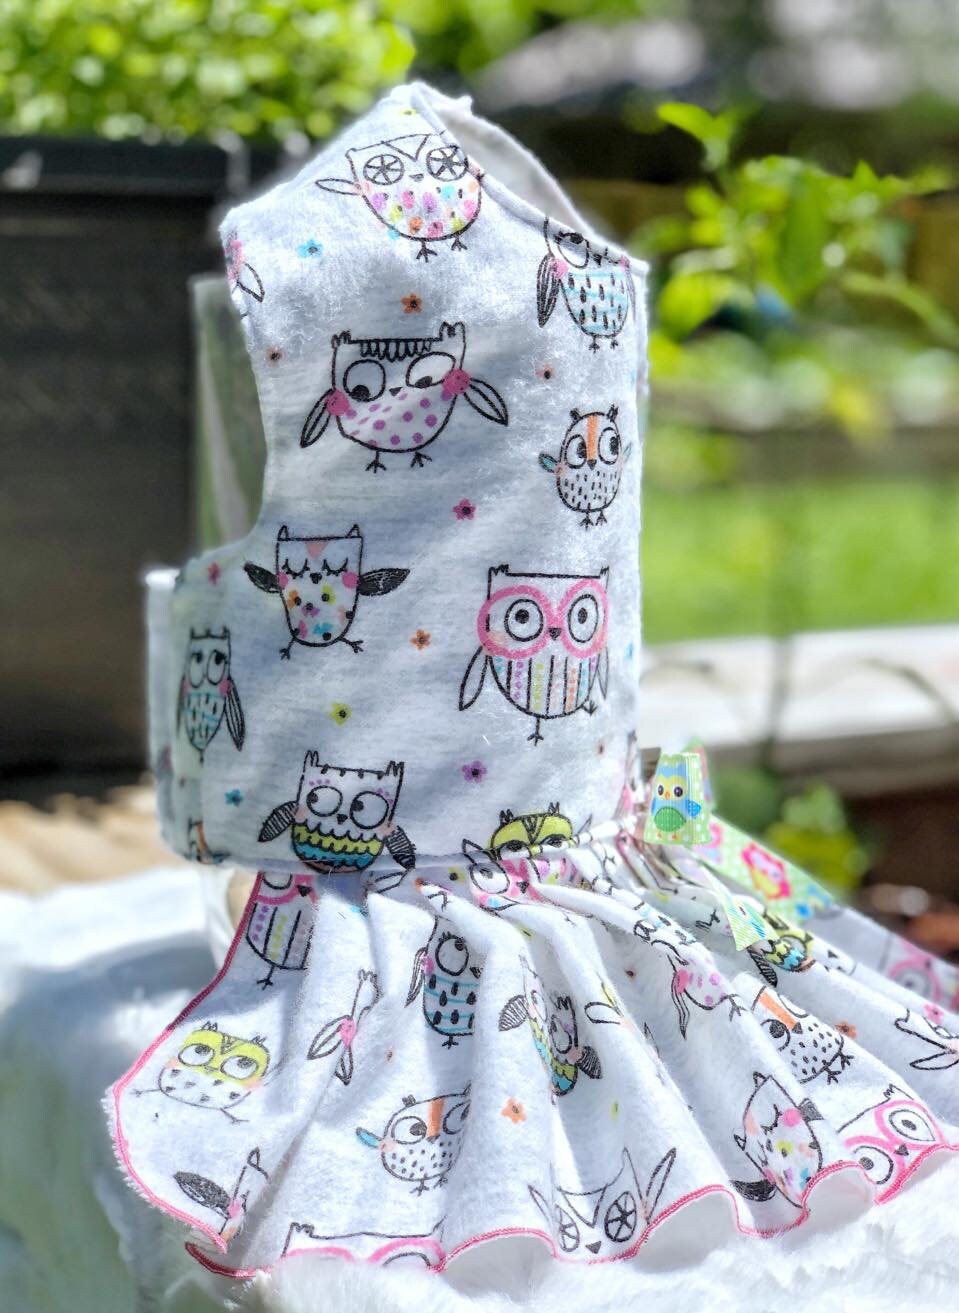 Dog Harness Dress Flannel Colorful Owls Cotton Lined Machine washable Next Day Shipping